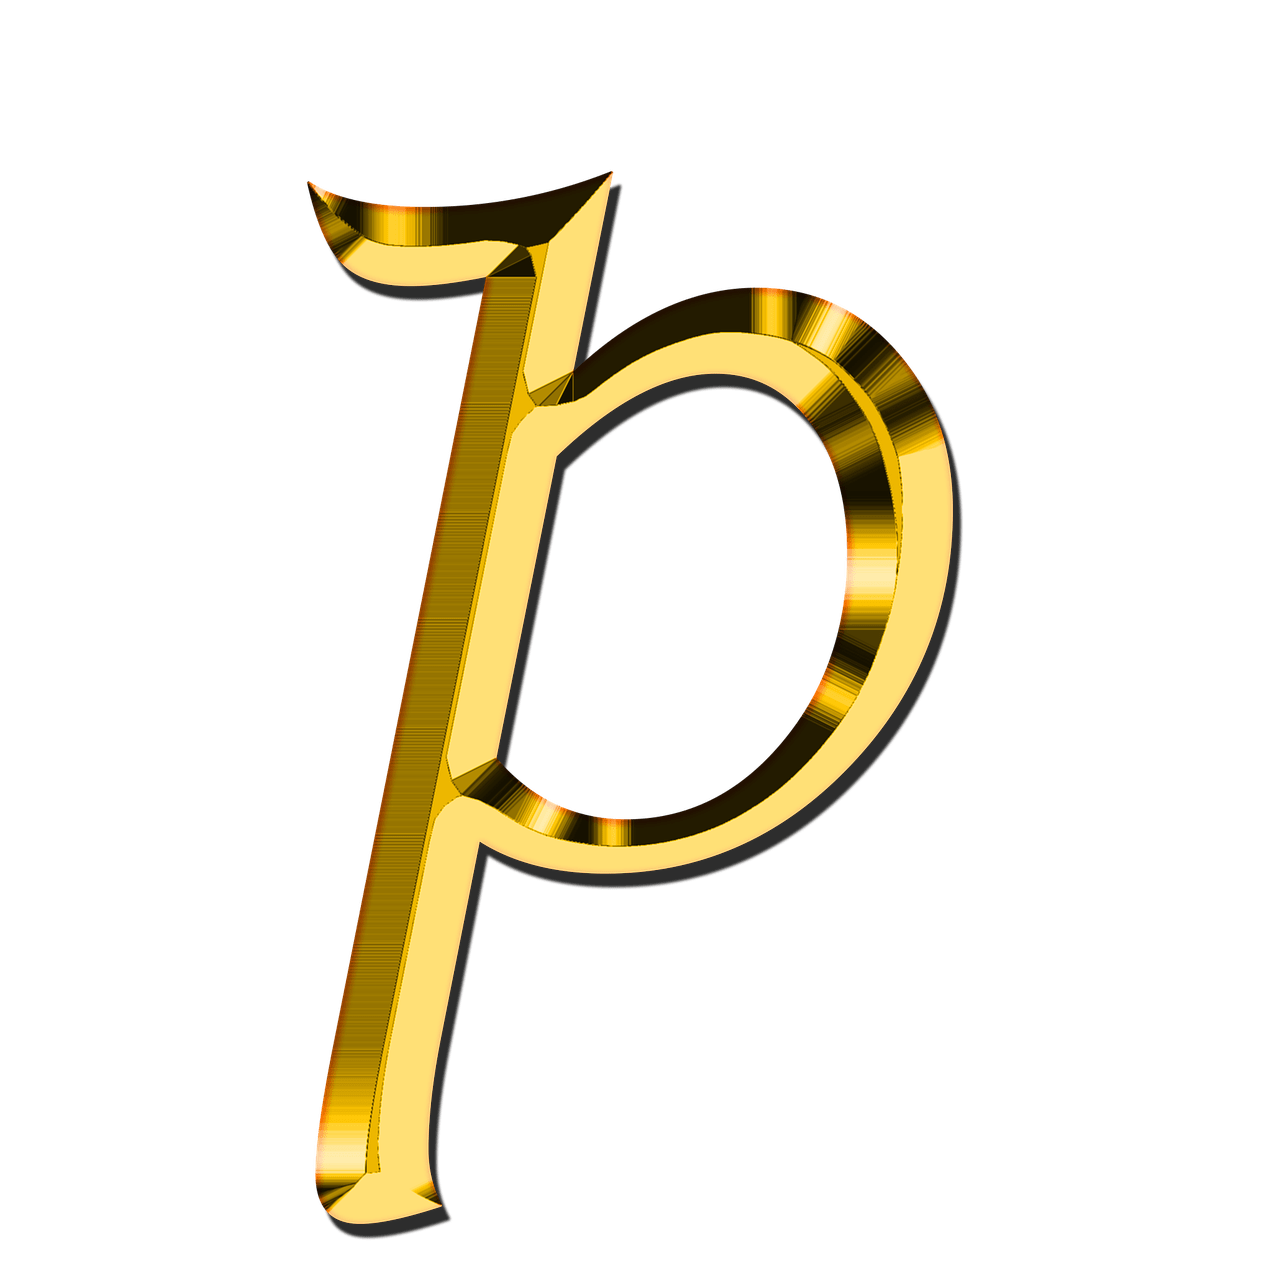 P Letter Free Download PNG HD PNG Image